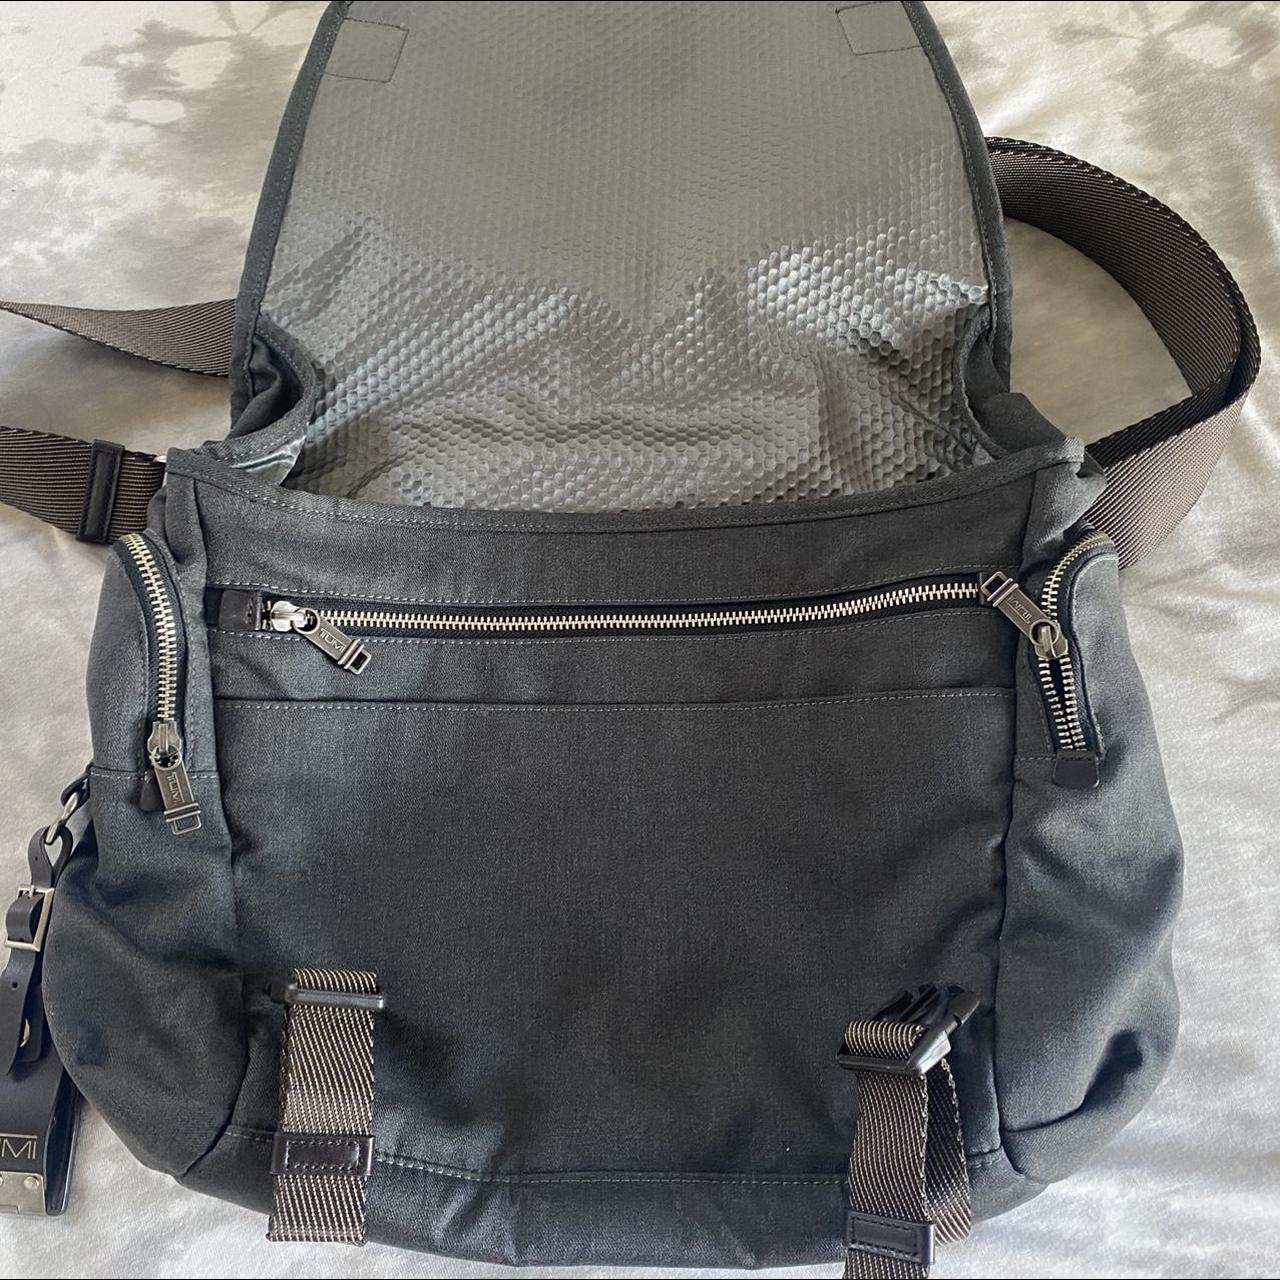 Product Image 2 - Tumi Messenger Bag

Like new condition

Lots